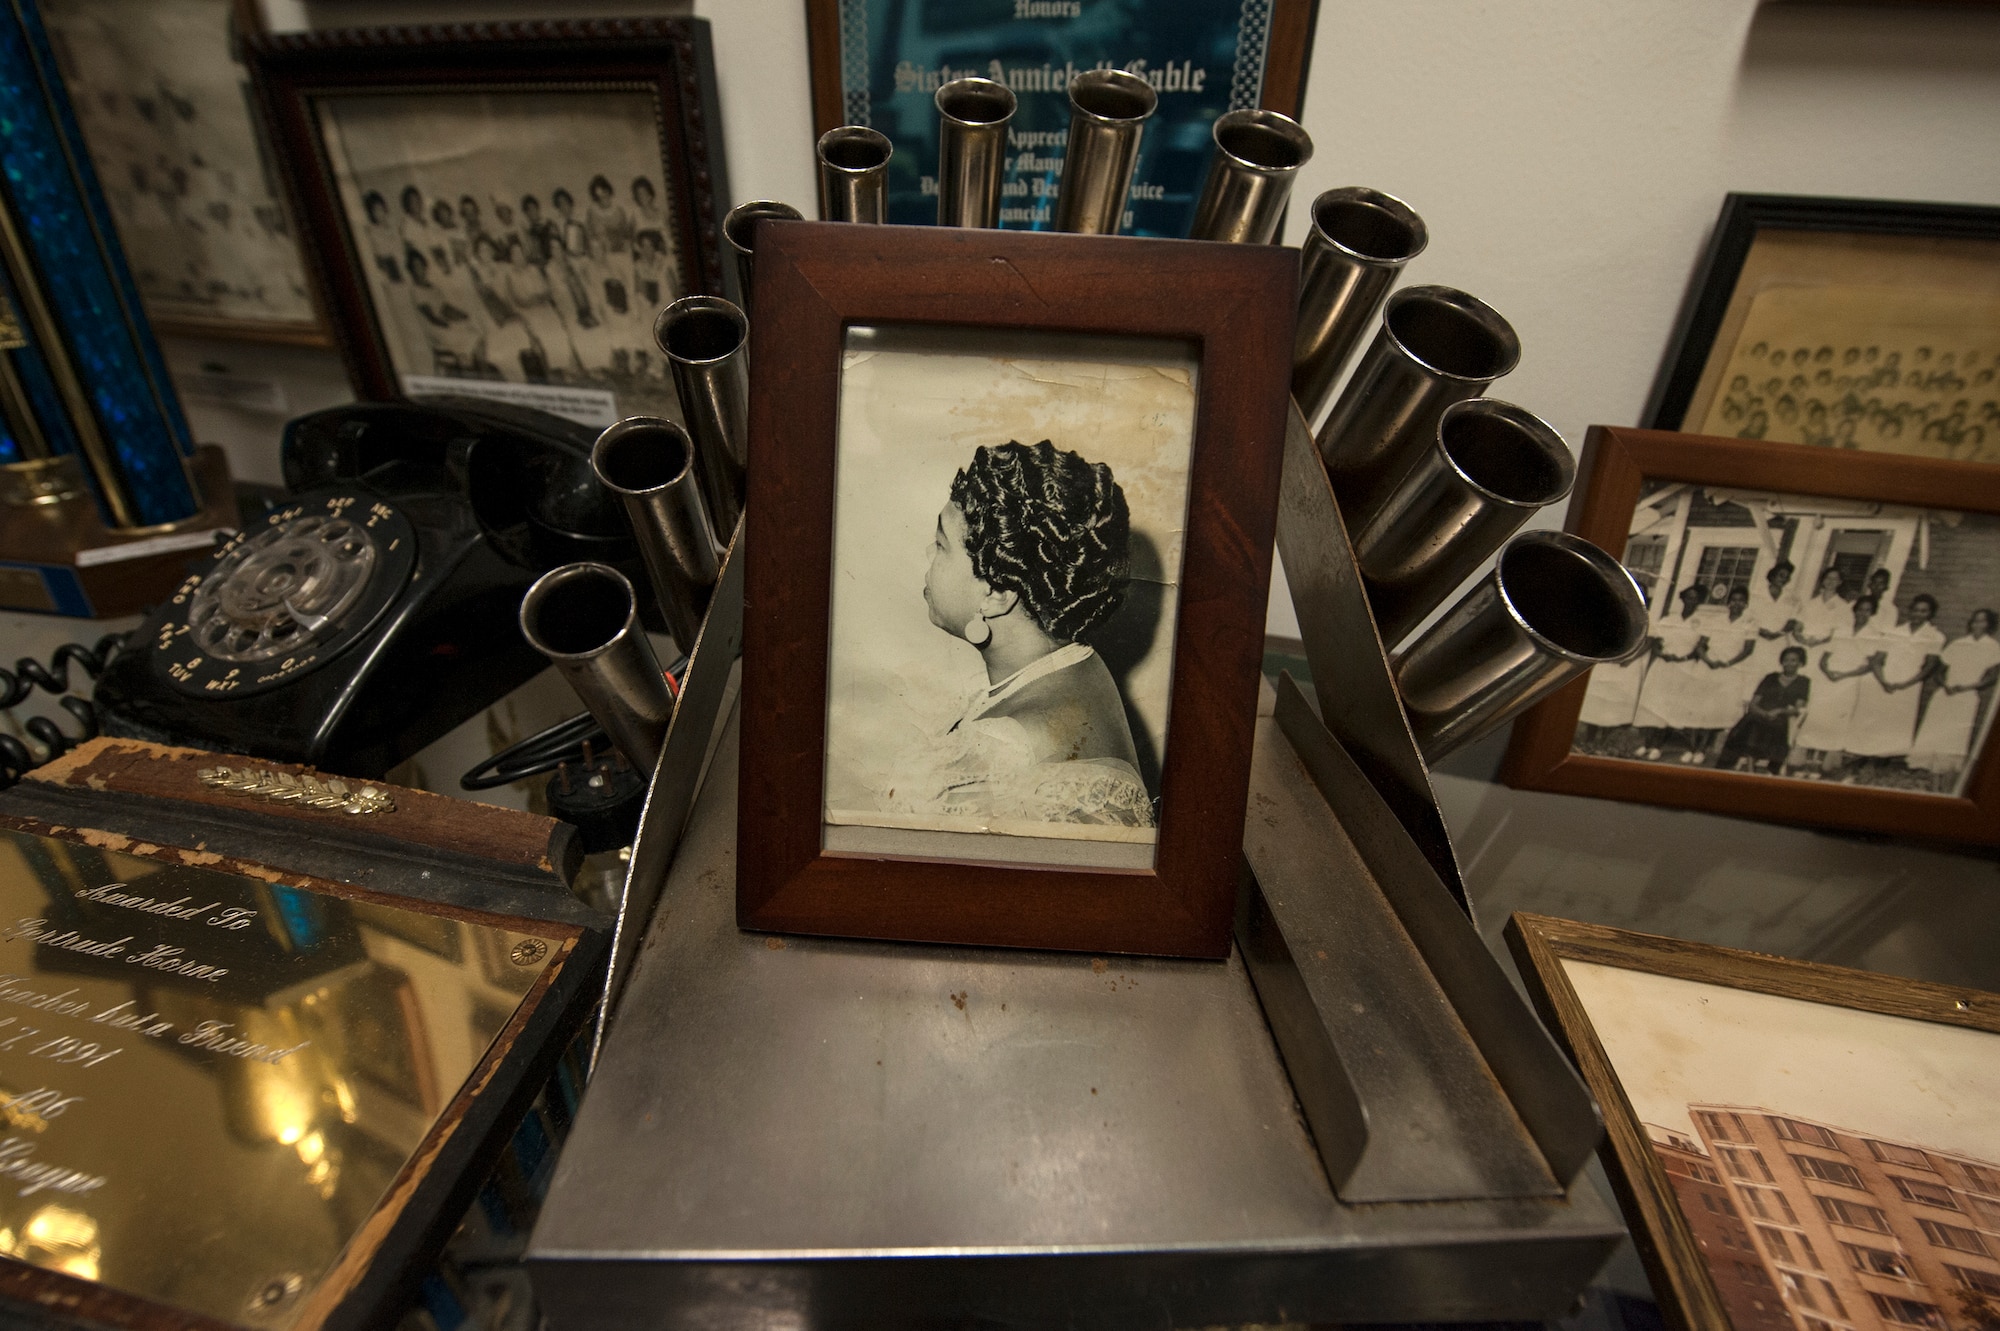 An antique curling iron holder and a photo of a finished hairstyle rest on a display case Feb. 8, 2016, at the Jack Hadley Black History Museum in Thomasville, Ga. The Cosmetology and La Charme Beauty and Culture School section of the museum showcases innovations and accomplishments made by black barbers and beauticians from Thomasville, Ga. (U.S. Air Force photo by Airman 1st Class Janiqua P. Robinson/Released)
